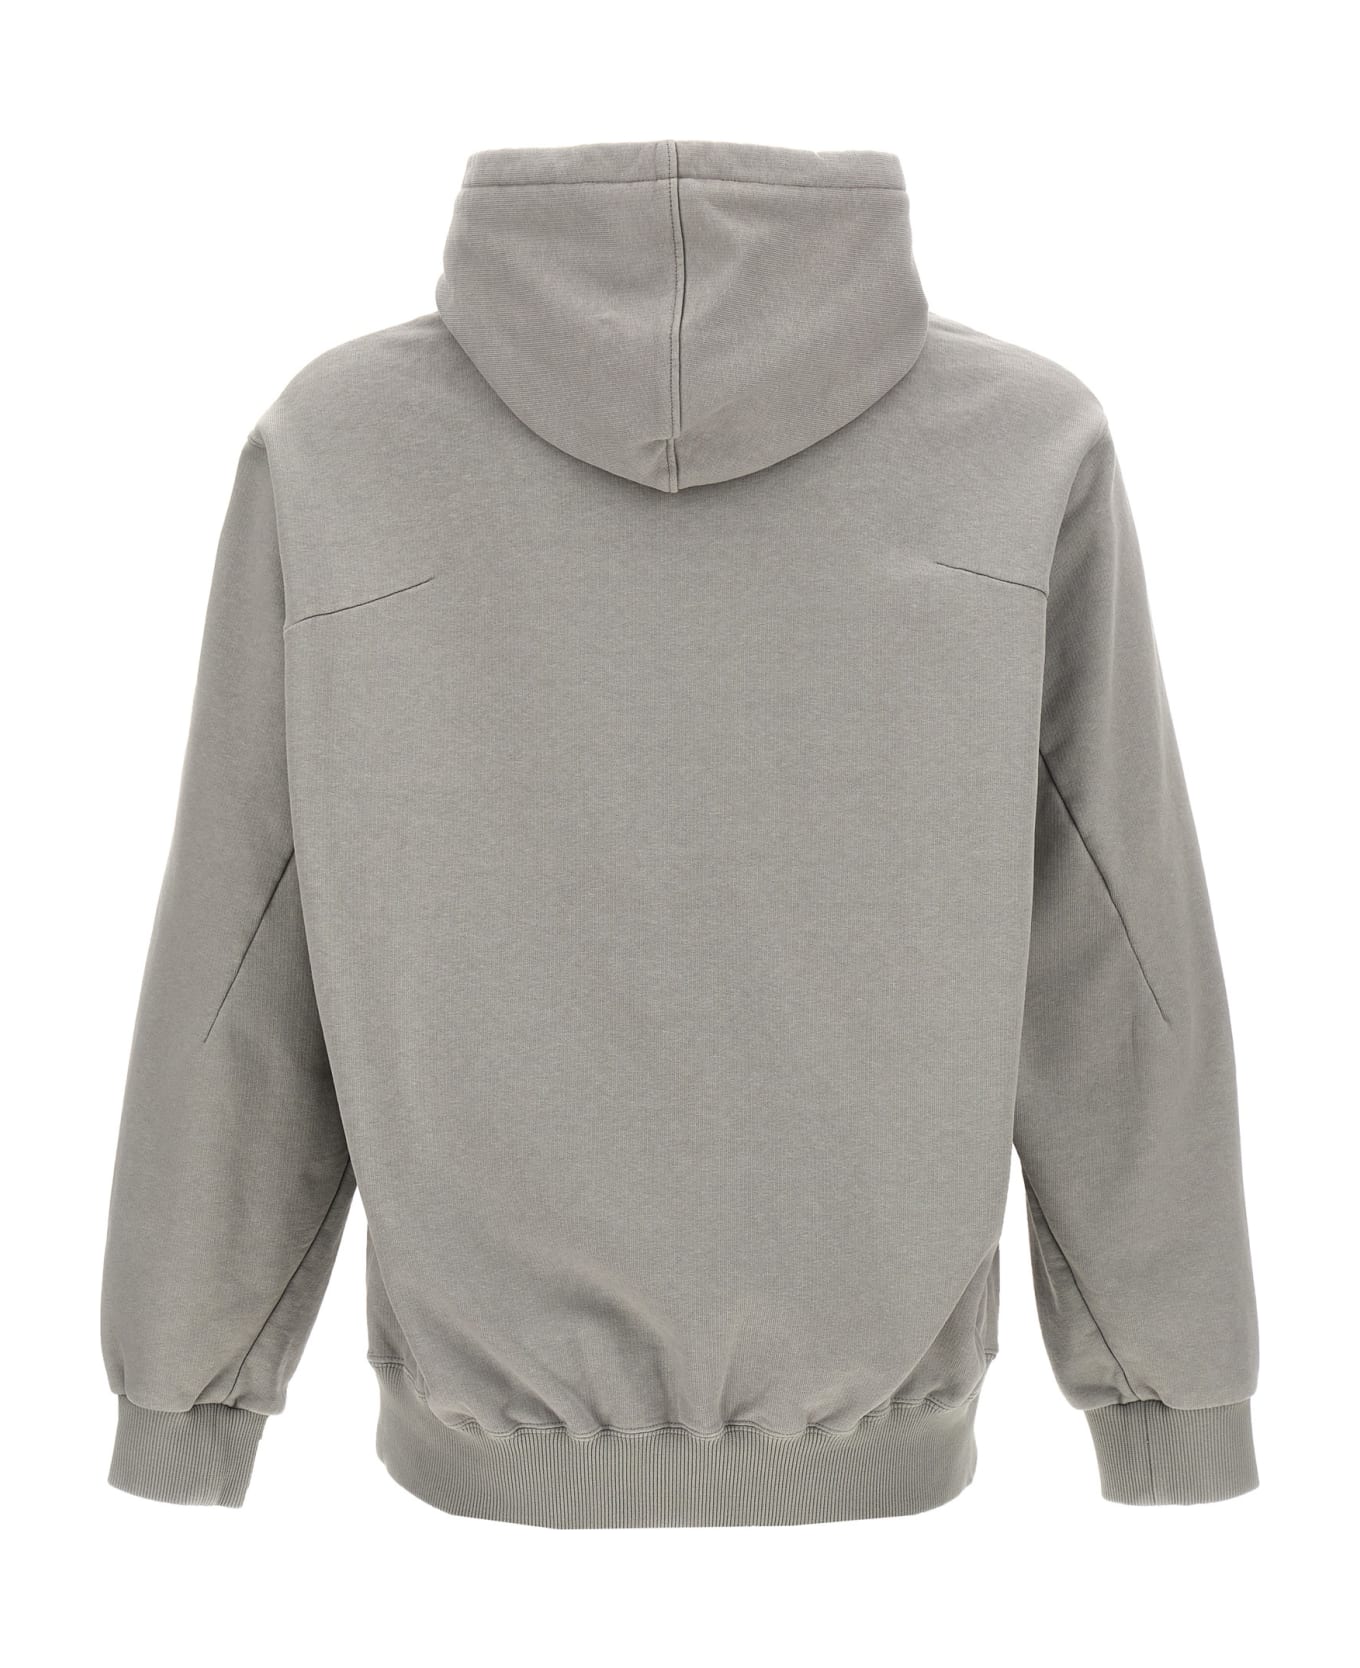 doublet 'cd-r Embroidery' Hoodie - Gray フリース